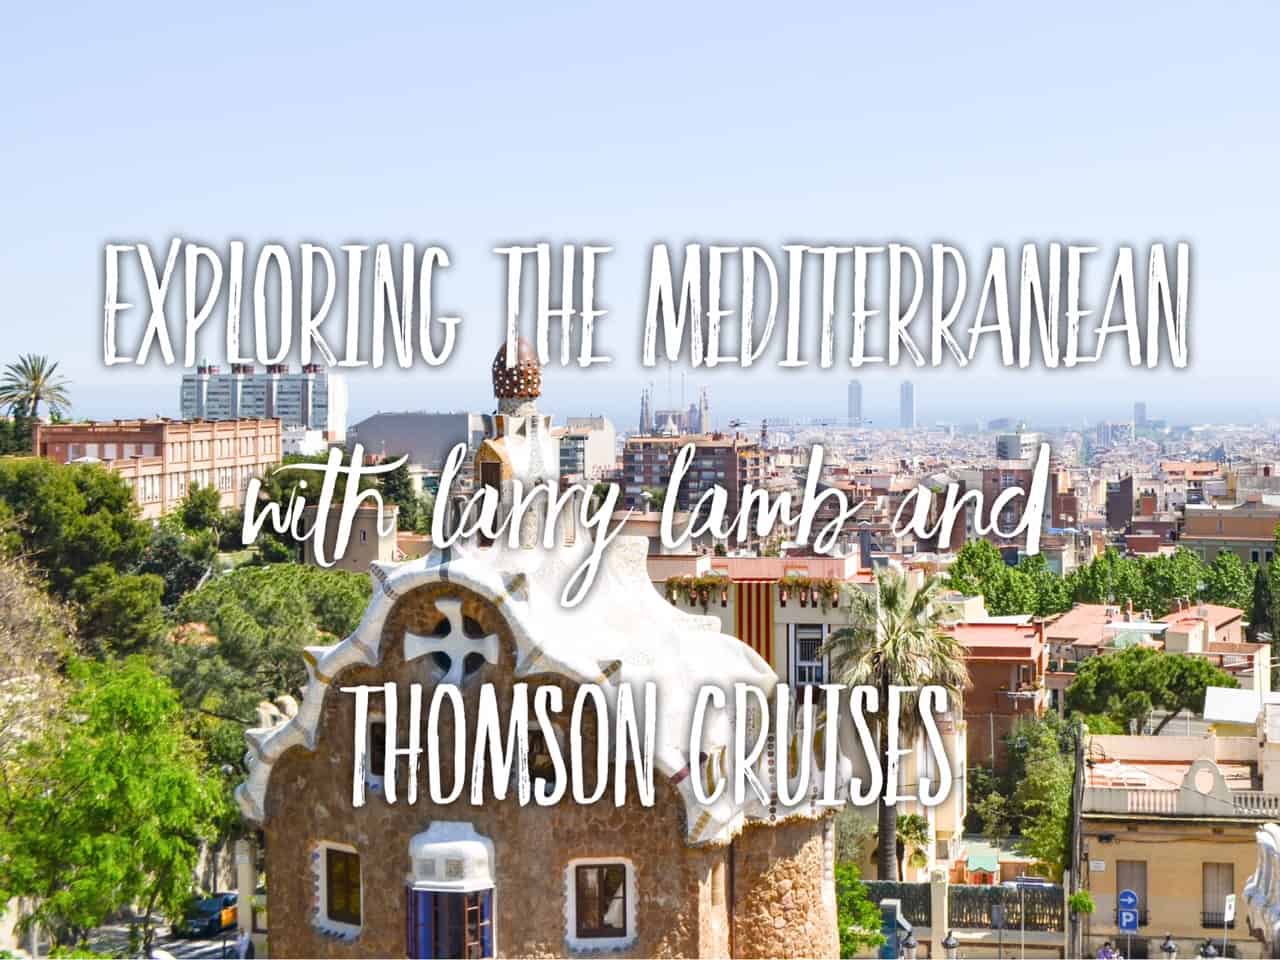 Exploring the Mediterranean with Larry Lamb and Thomson Cruises